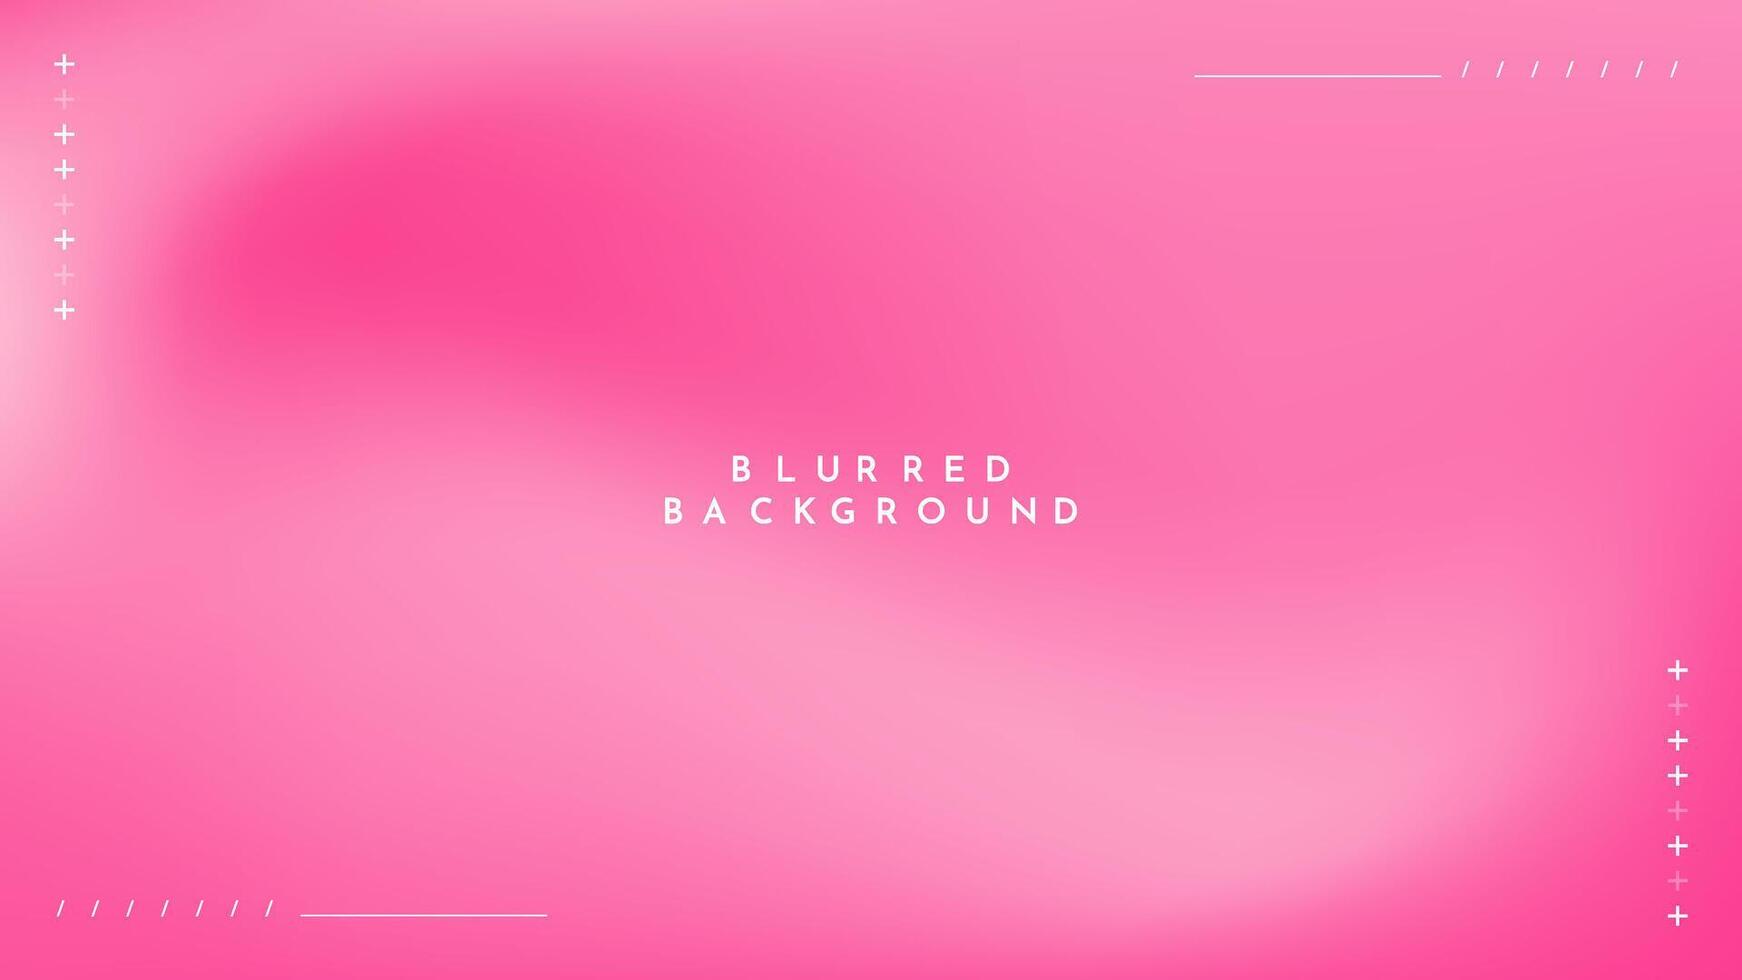 Abstract Background pink color with Blurred Image is a visually appealing design asset for use in advertisements, websites, or social media posts to add a modern touch to the visuals. vector